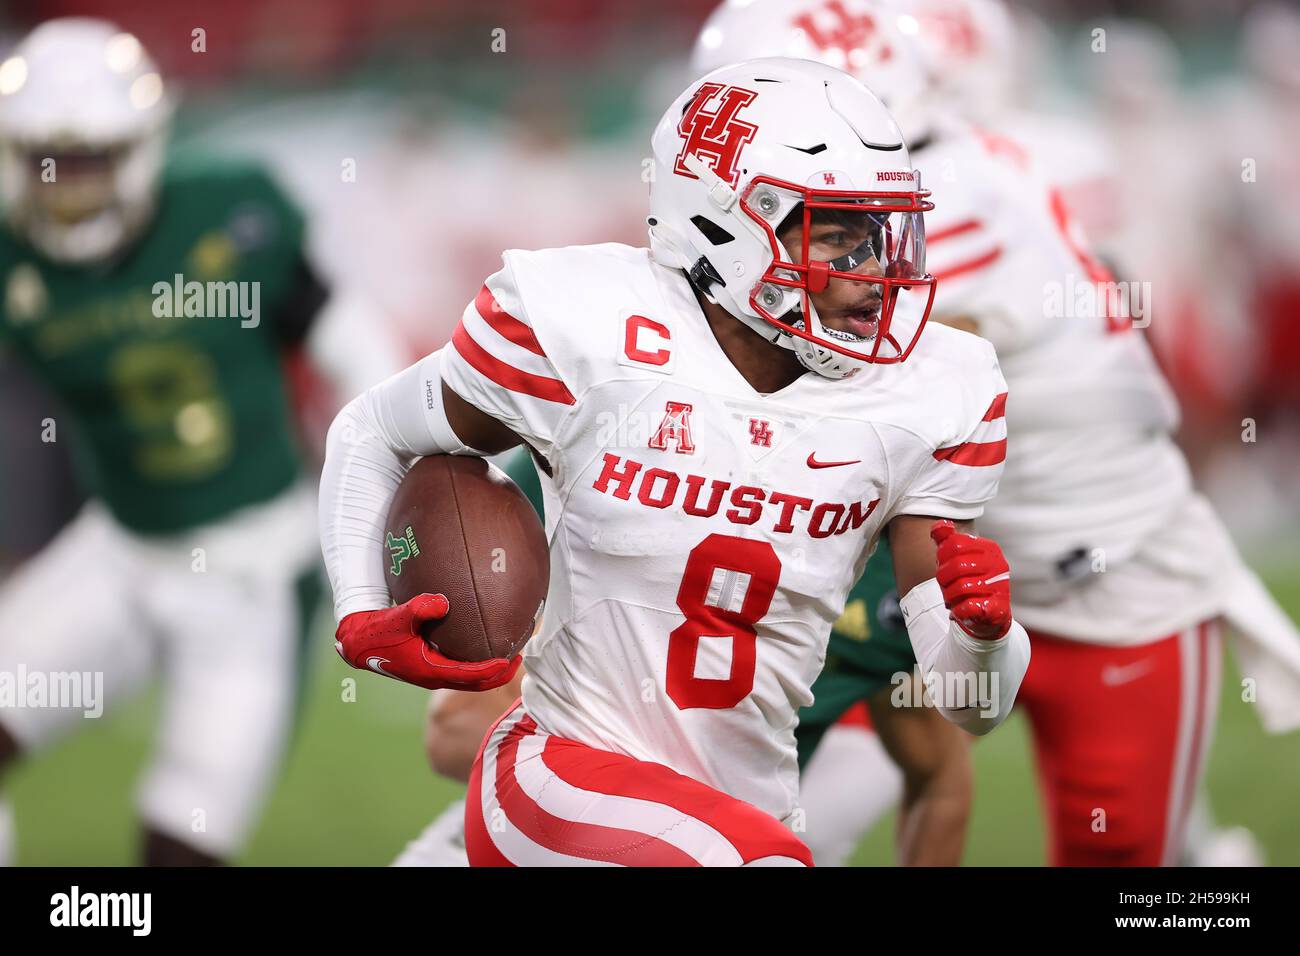 Tampa, FL, USA. 6th Nov, 2021. Houston Cougars cornerback Marcus Jones (8) returns a kickoff during the game between the Houston Cougars and the South Florida Bulls at Raymond James Stadium in Tampa, FL. (Photo by Peter Joneleit). Credit: csm/Alamy Live News Stock Photo